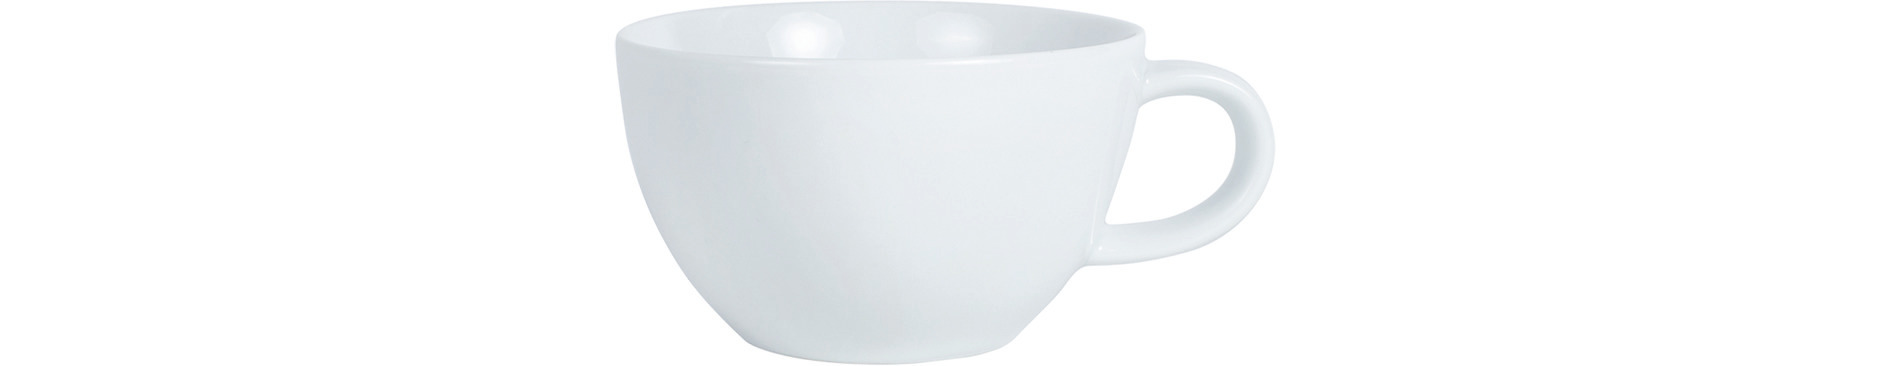 Milchkaffee-Obere Concento 0,34 l weiss